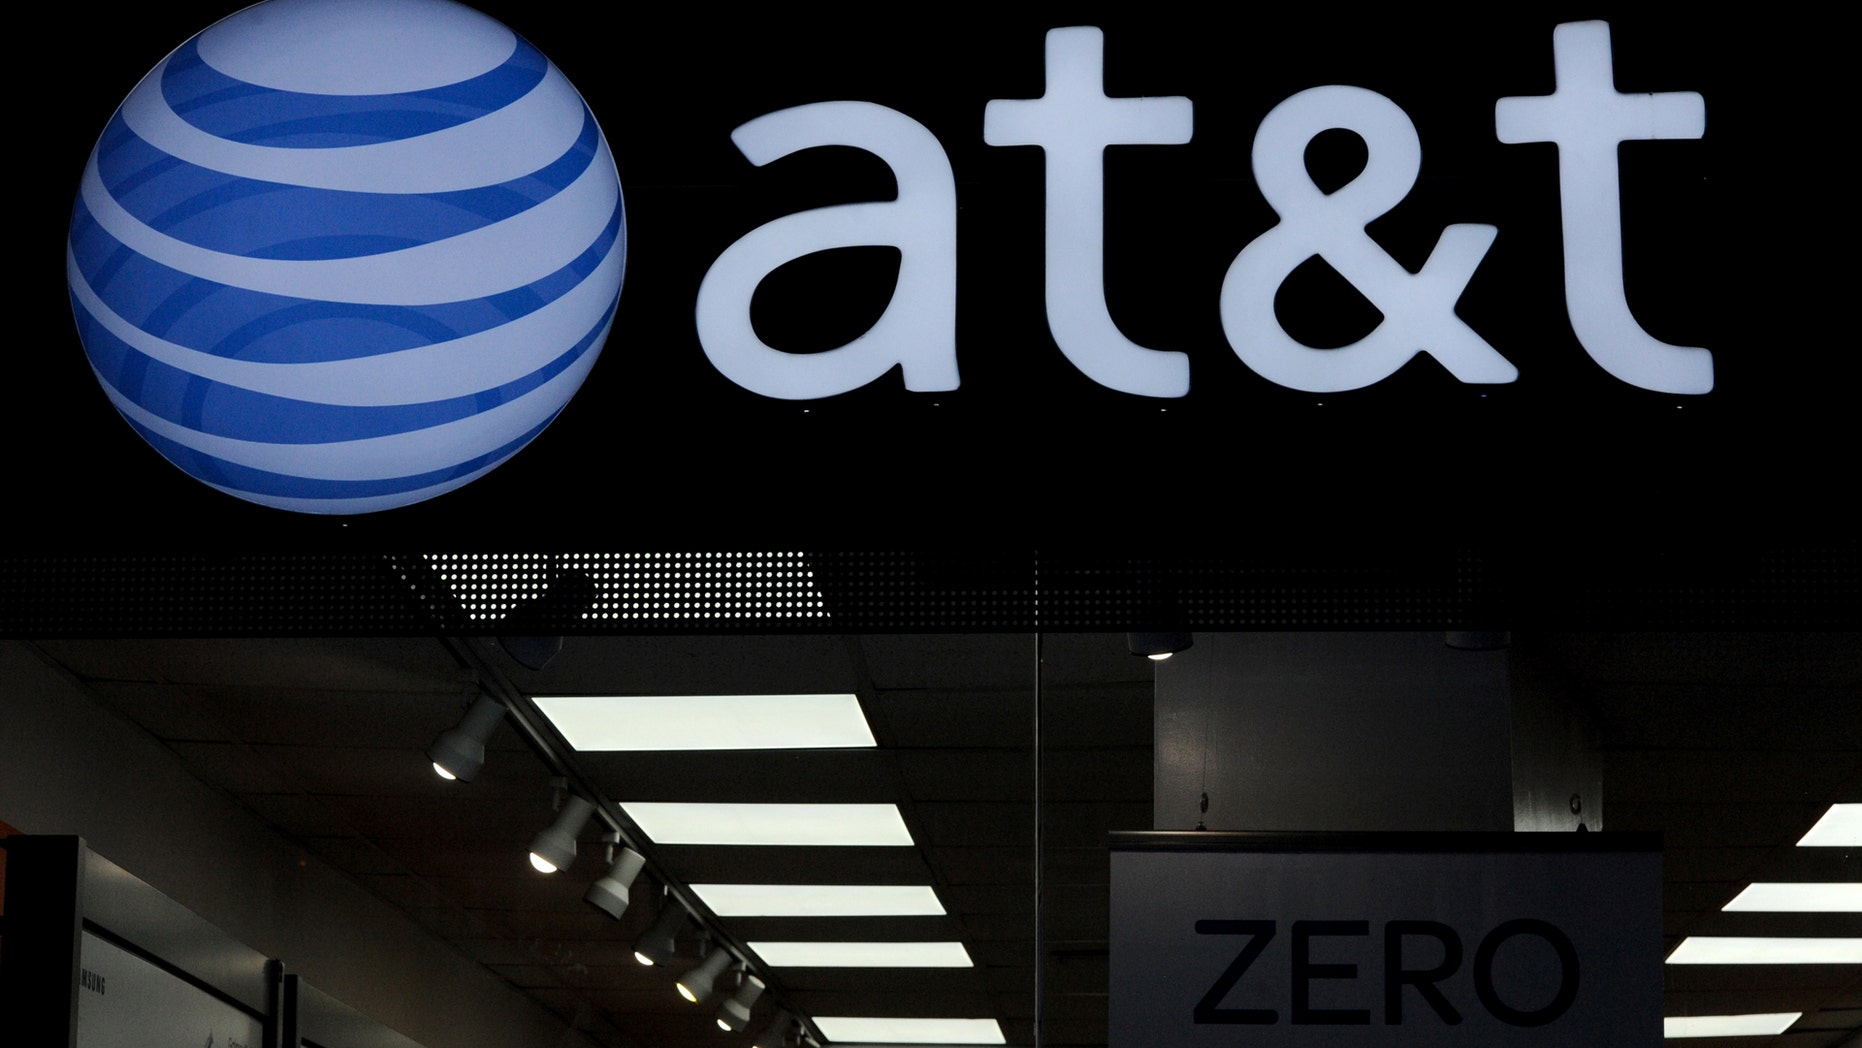 AT&T is putting its fake 5G logo on iPhones too Fox News